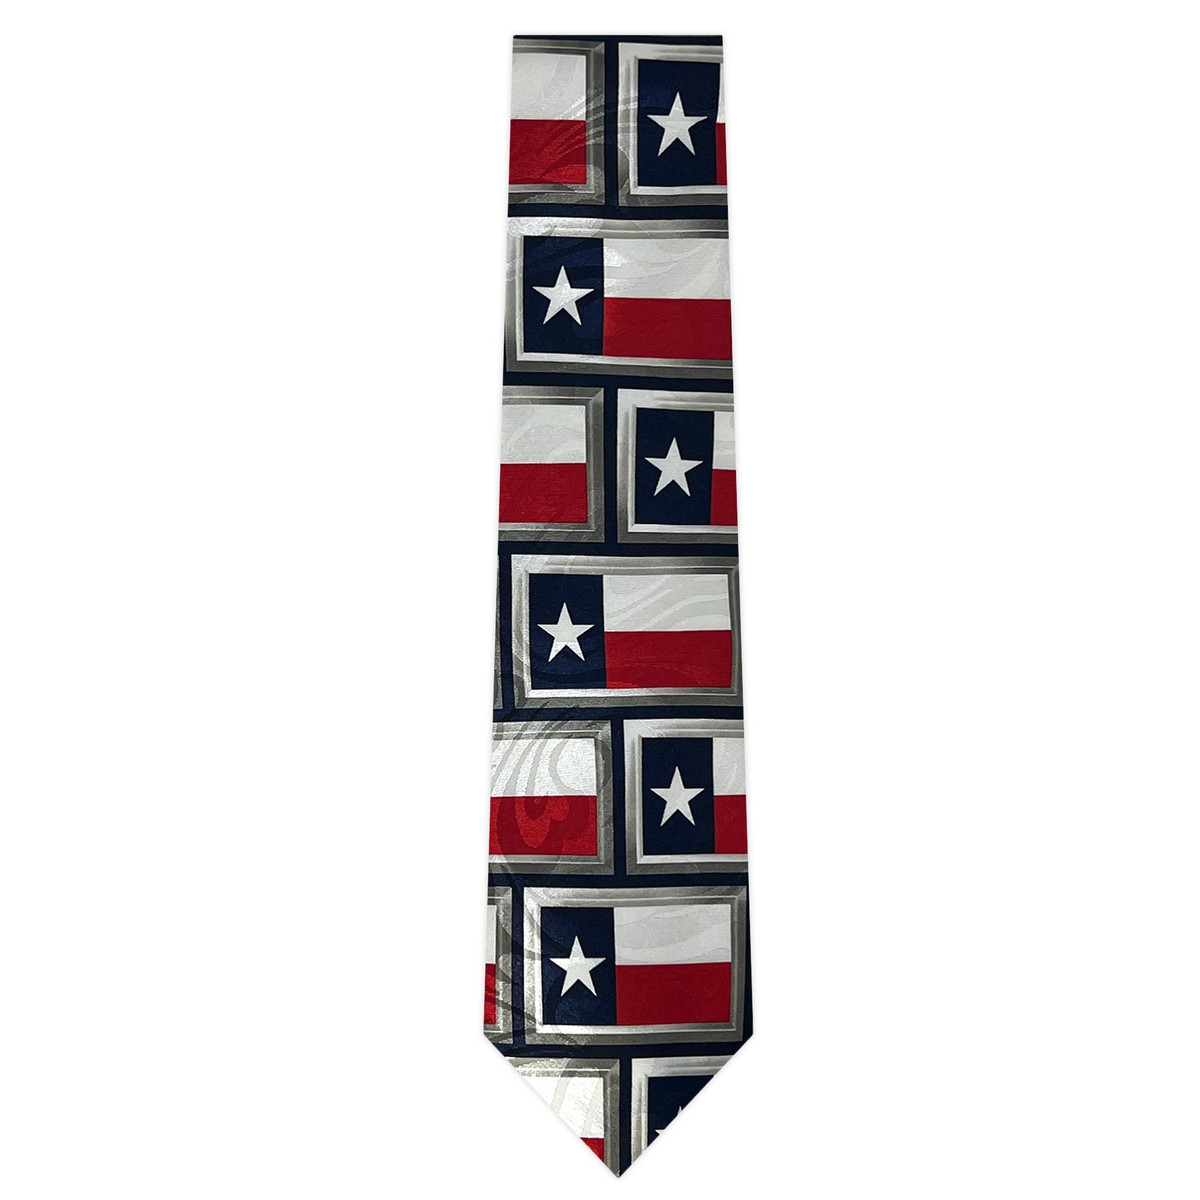 Texas - Lone Star Pattern Novelty Tie - Red White Blue